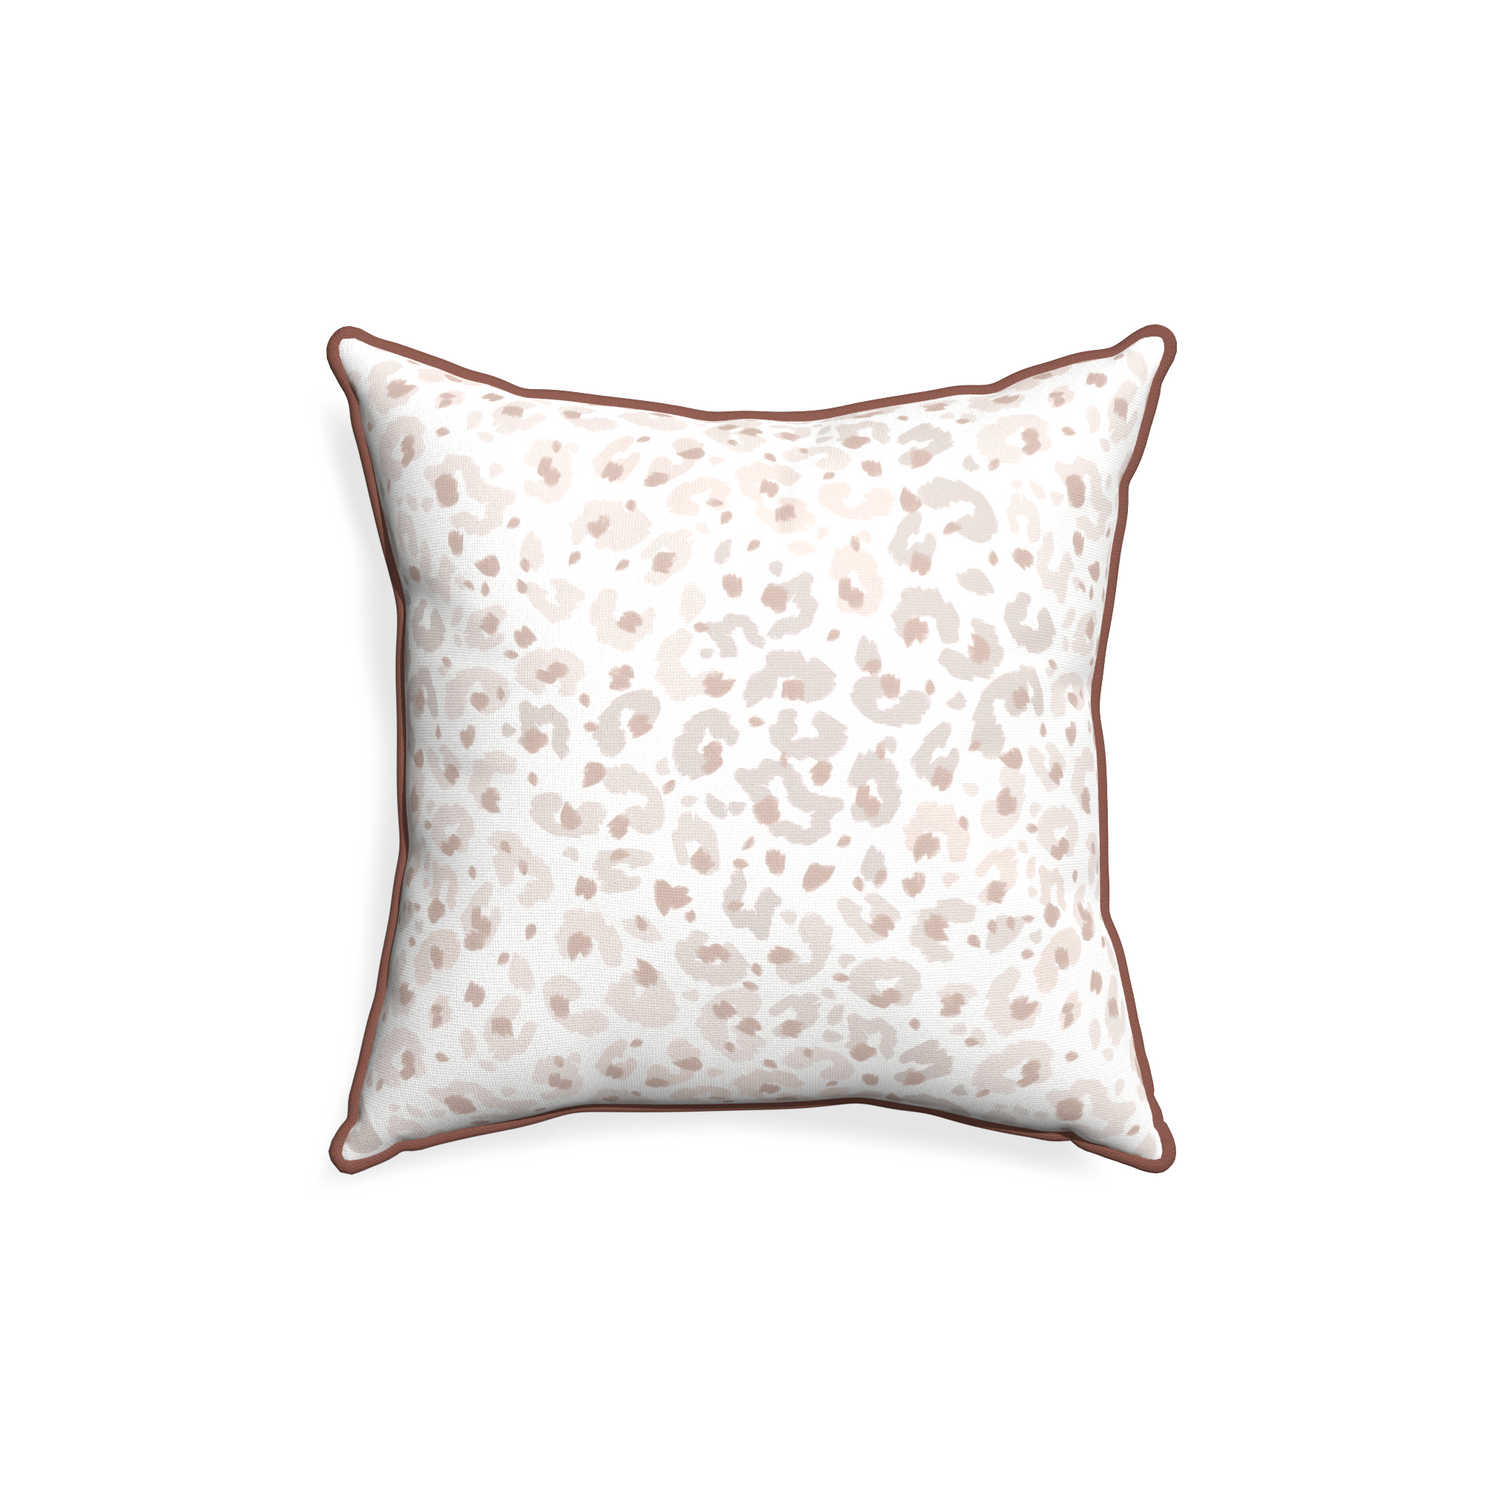 18-square rosie custom beige animal printpillow with w piping on white background